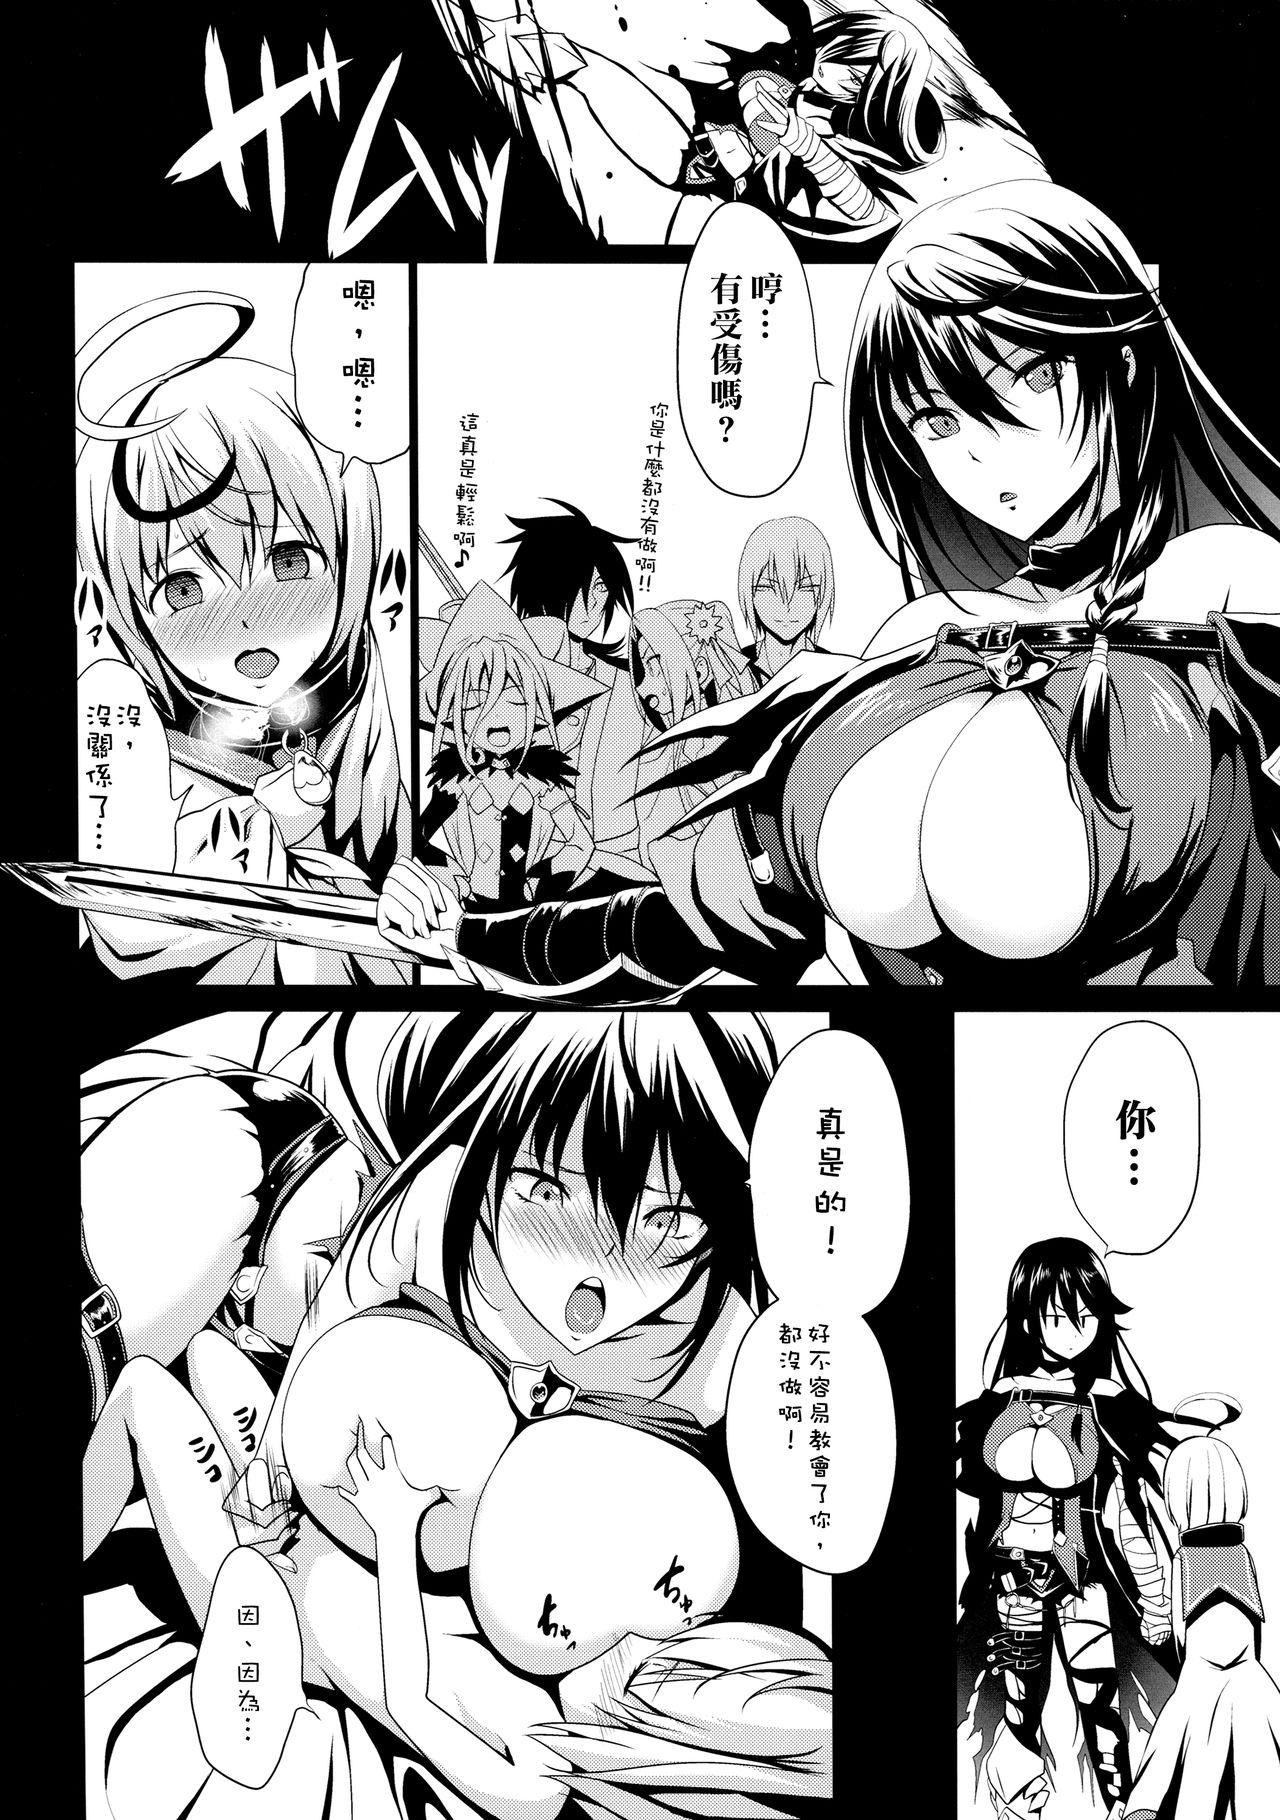 Family Taboo Tales of Breastia - Tales of berseria Teenage Porn - Page 8